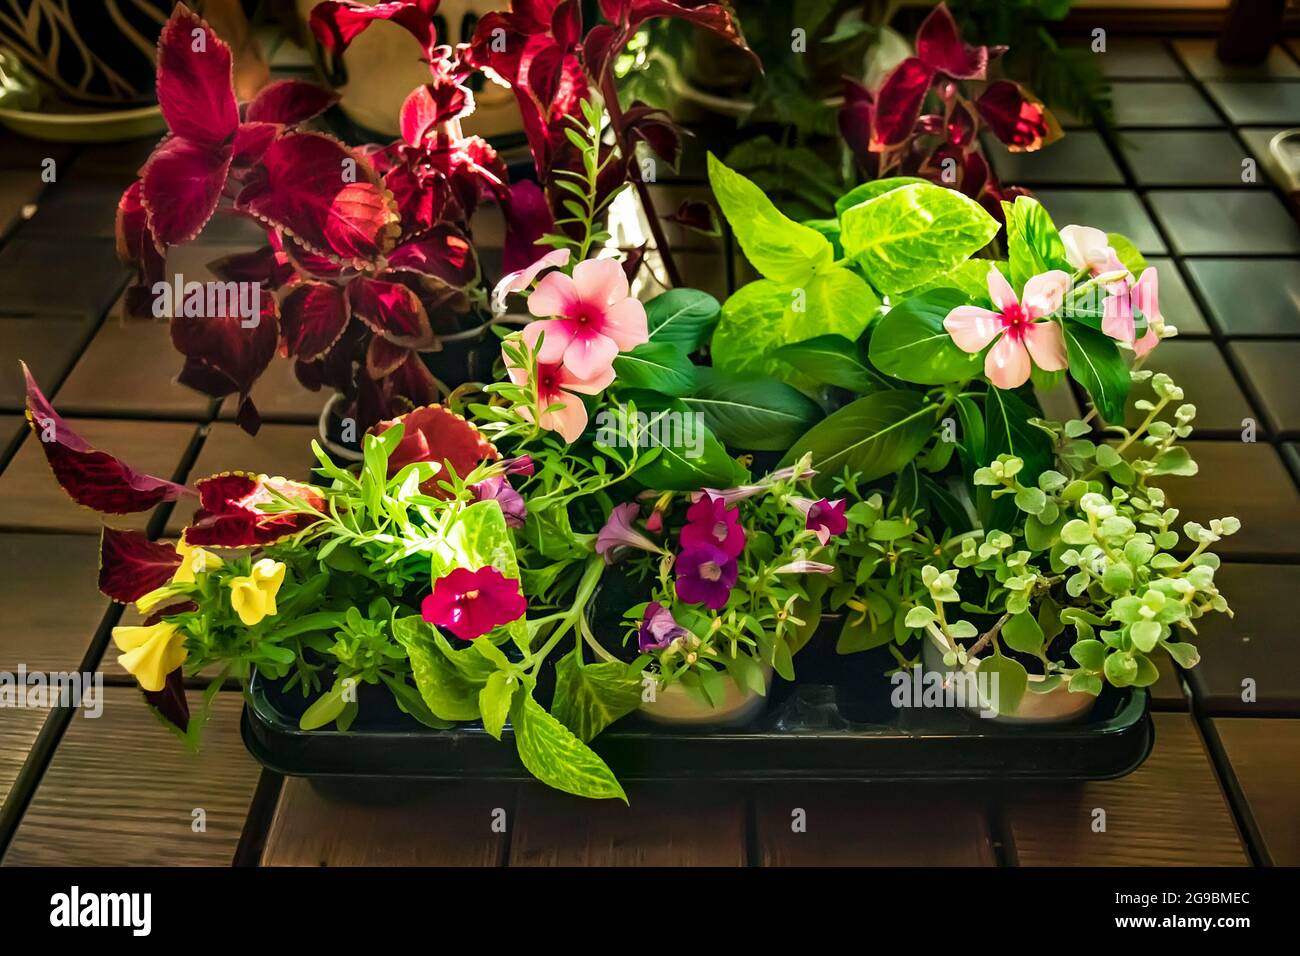 variety of blooming flowers in a container for sale at a flower shop. Seedlings in temporary pots. Coleus, Catharanthus, Pelargonium and Bacopa purcha Stock Photo